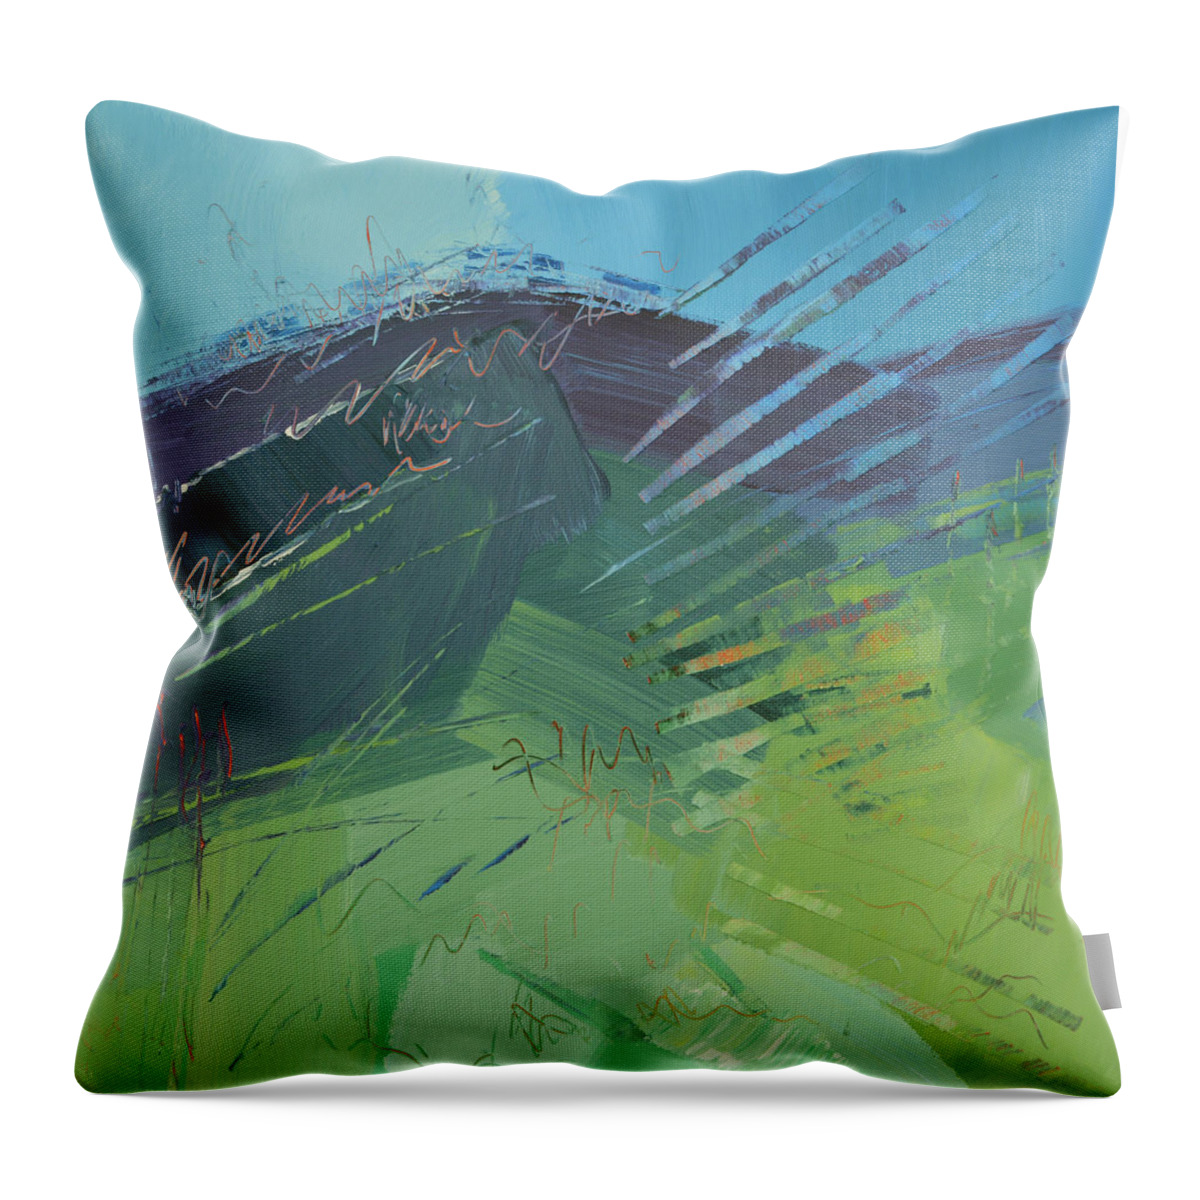 Mountain Throw Pillow featuring the painting Mountain High by Linda Bailey